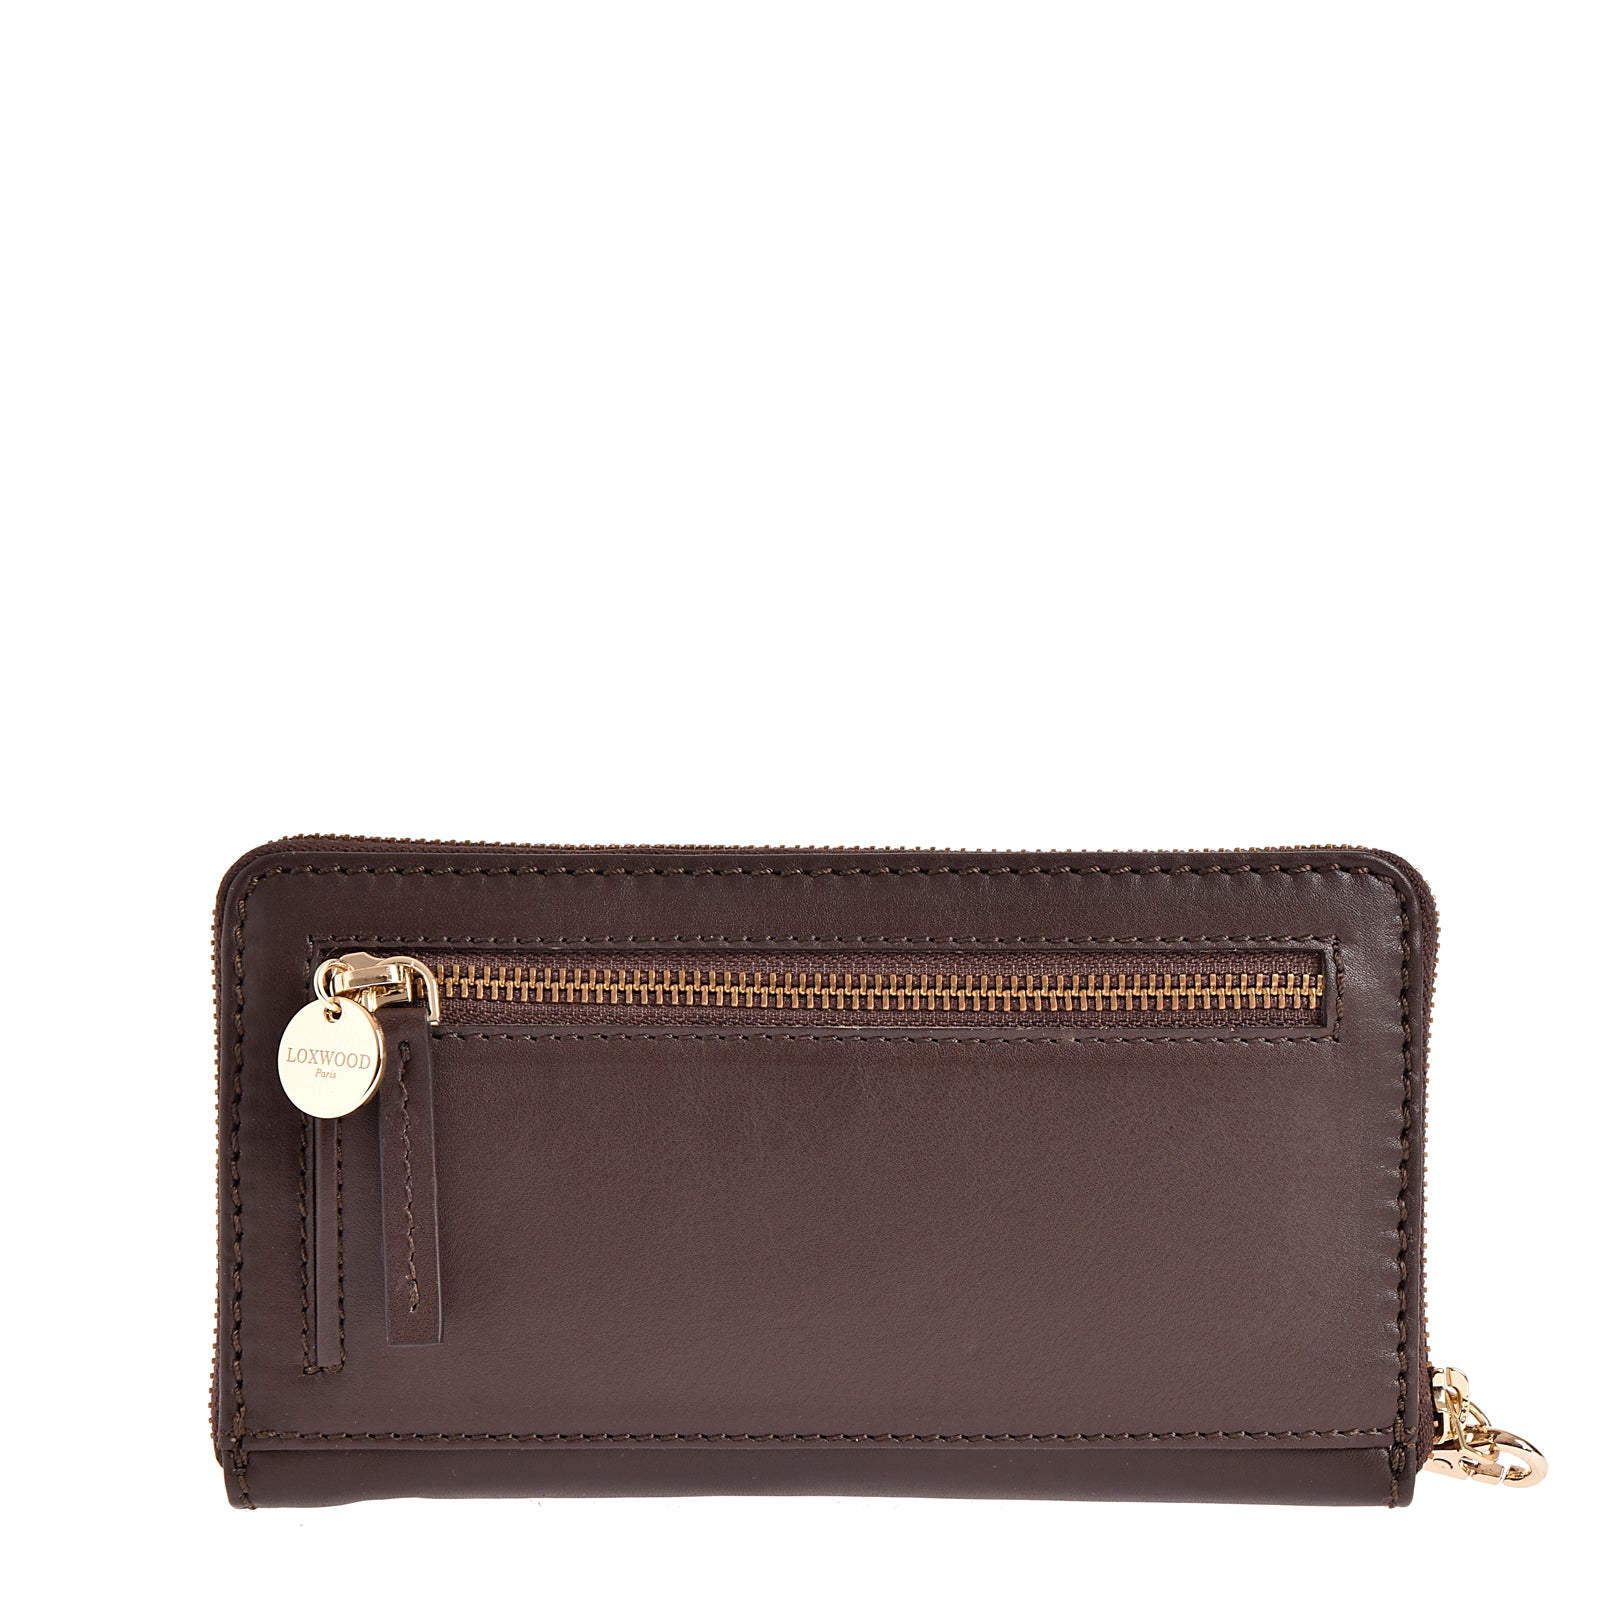 ZIPPERED WALLET - Nappa leather